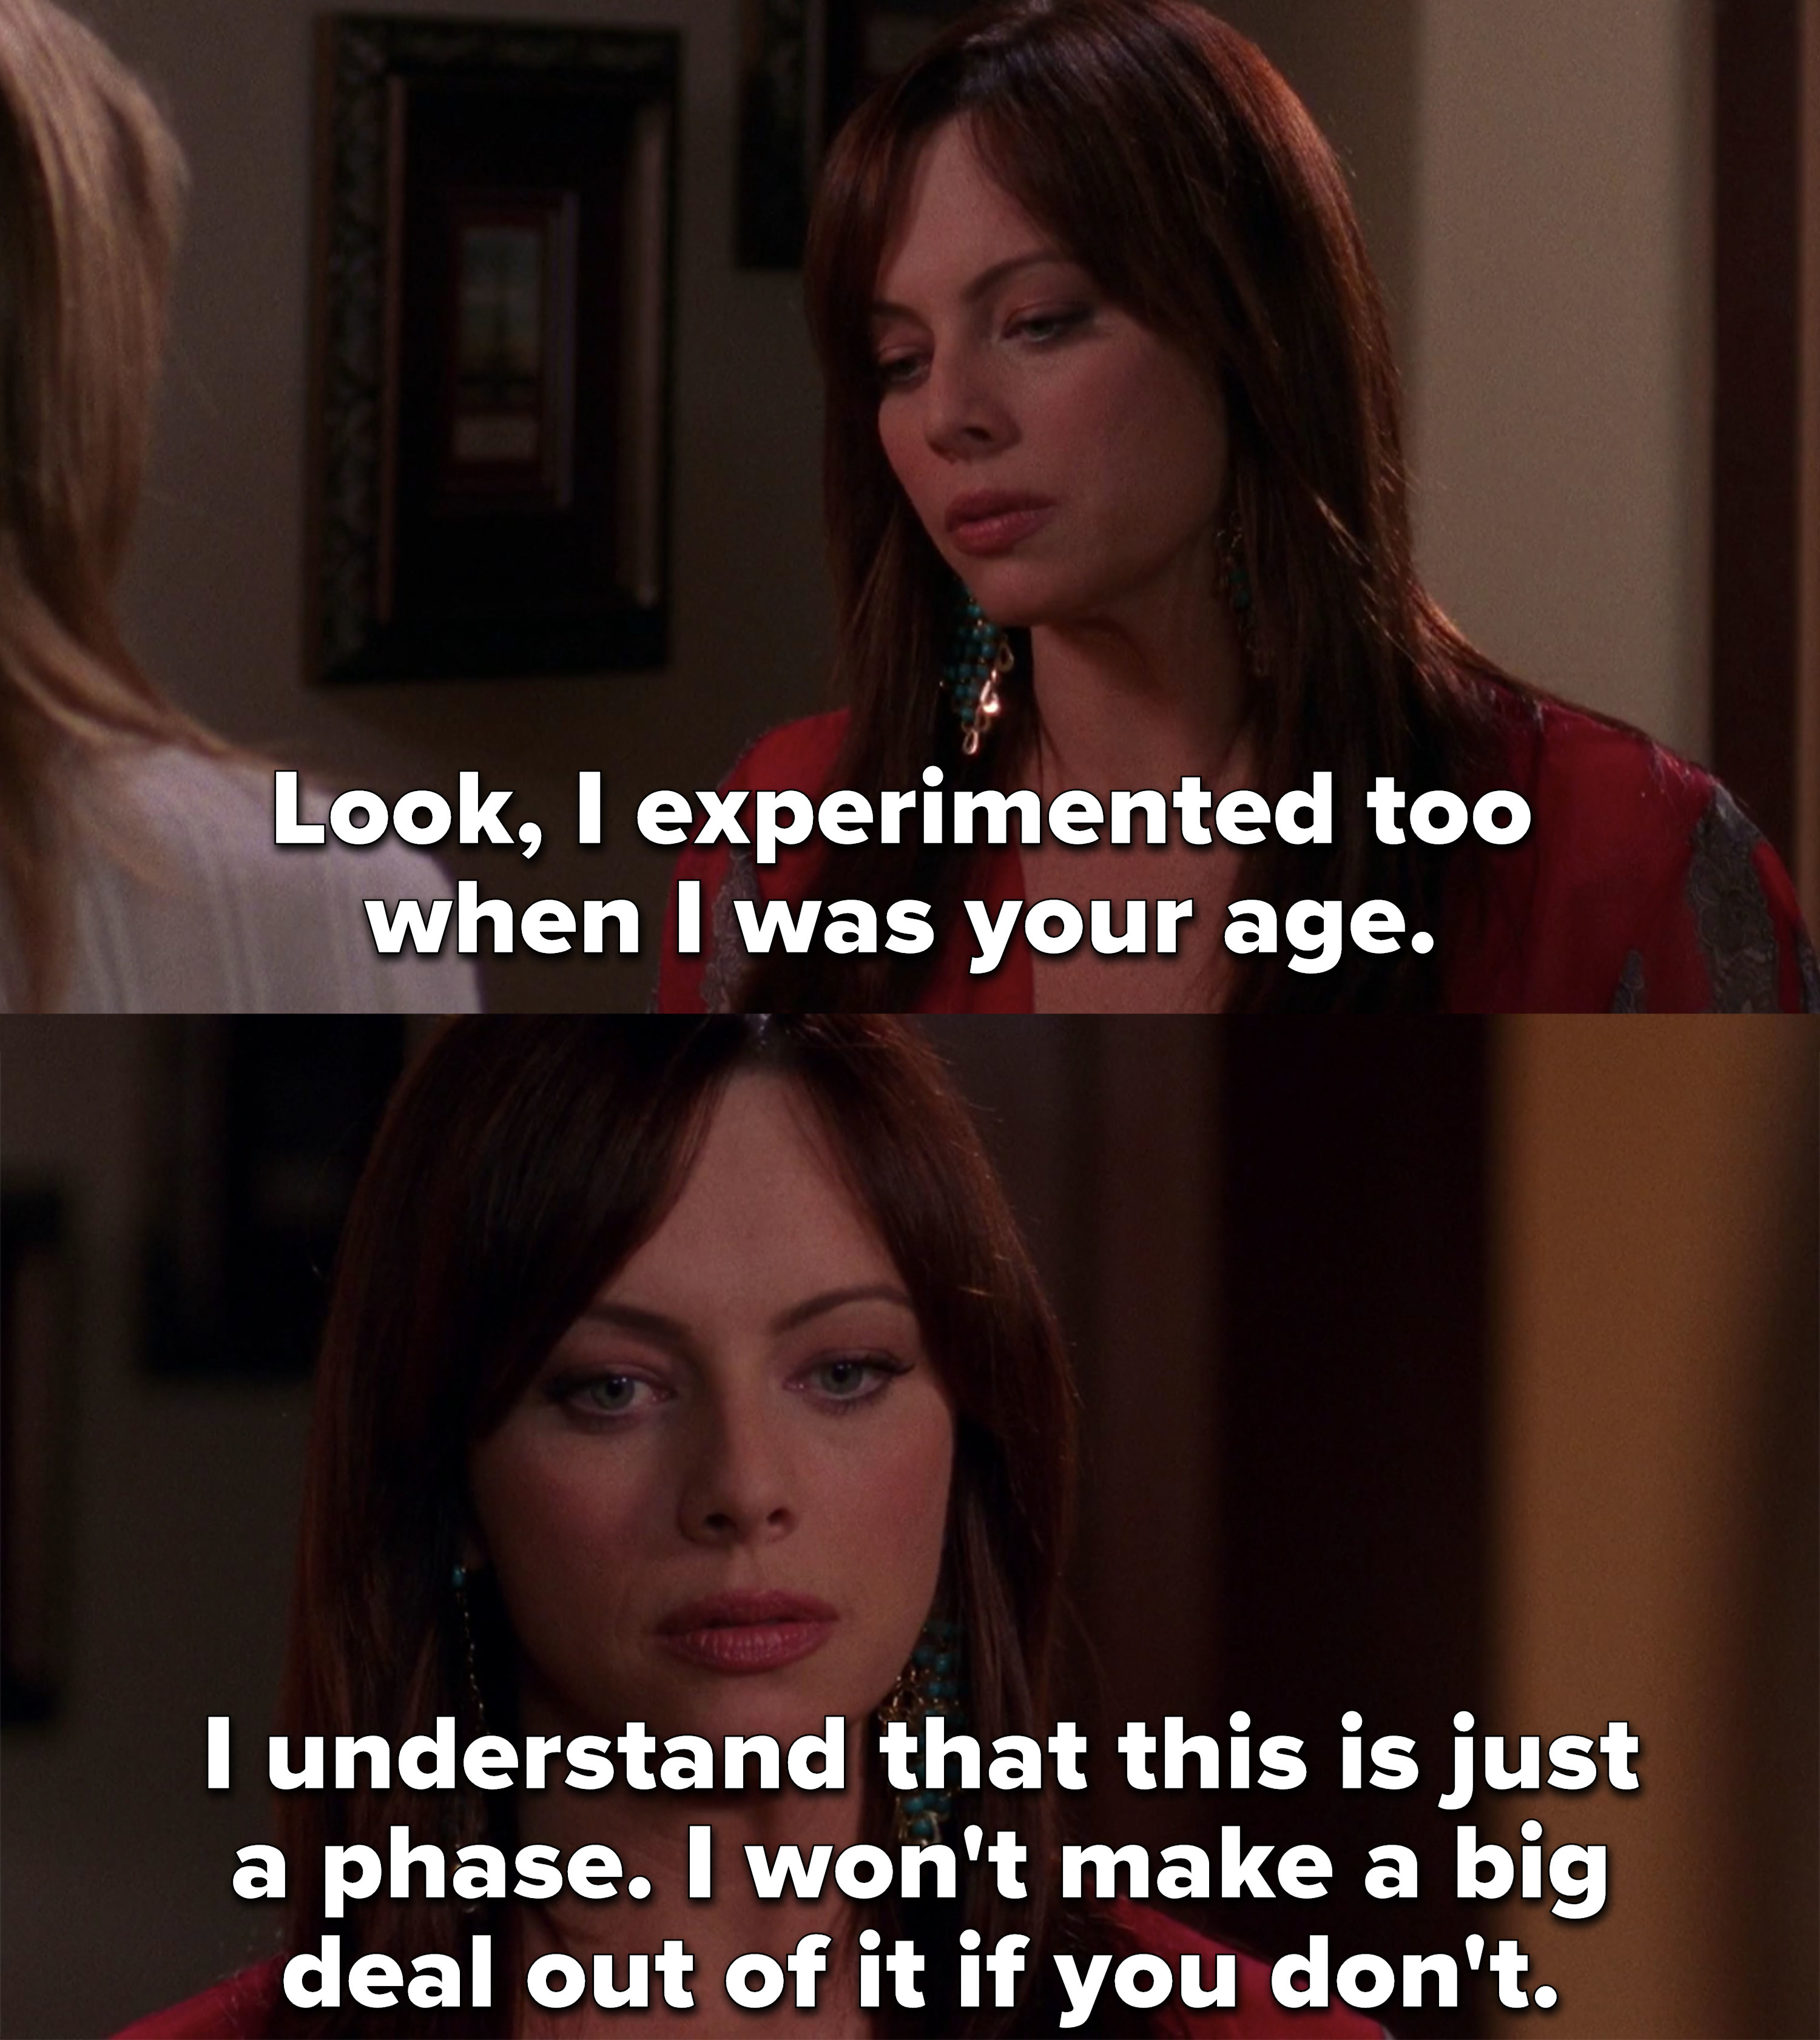 Julie on &quot;The O.C.&quot; tells Marissa she experimented too at her age, that it&#x27;s just a phase